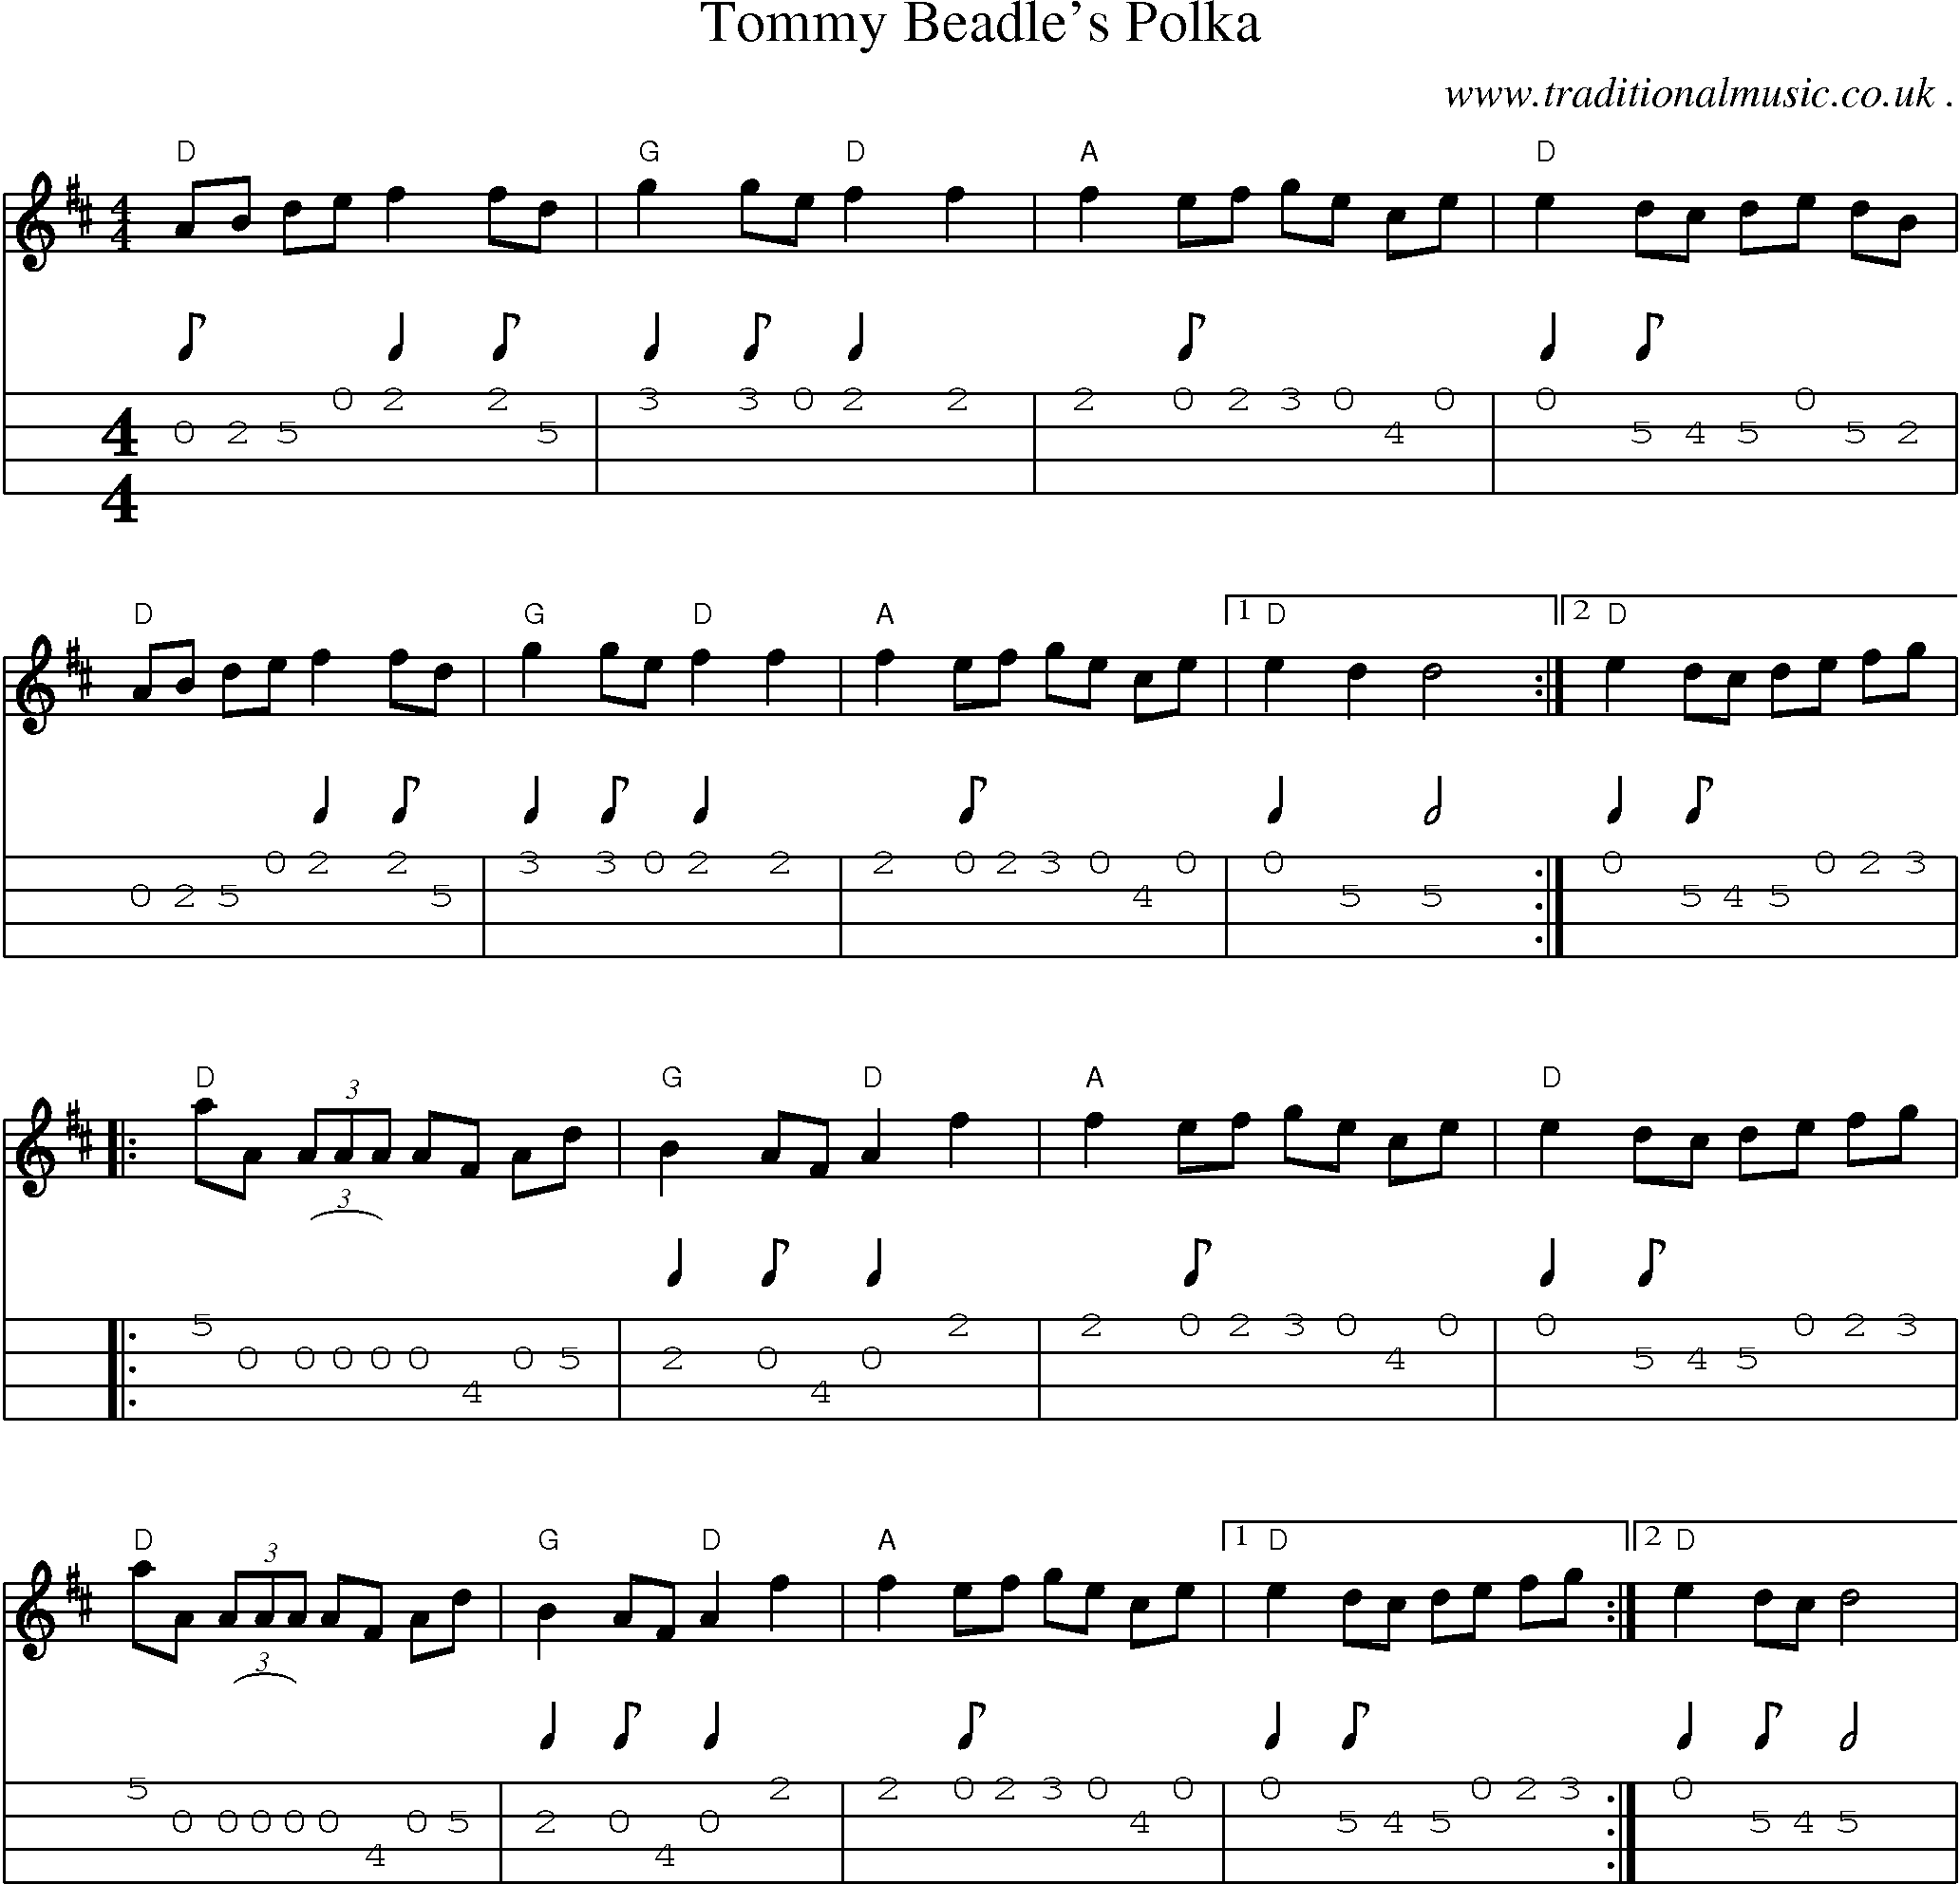 Music Score and Guitar Tabs for Tommy Beadles Polka